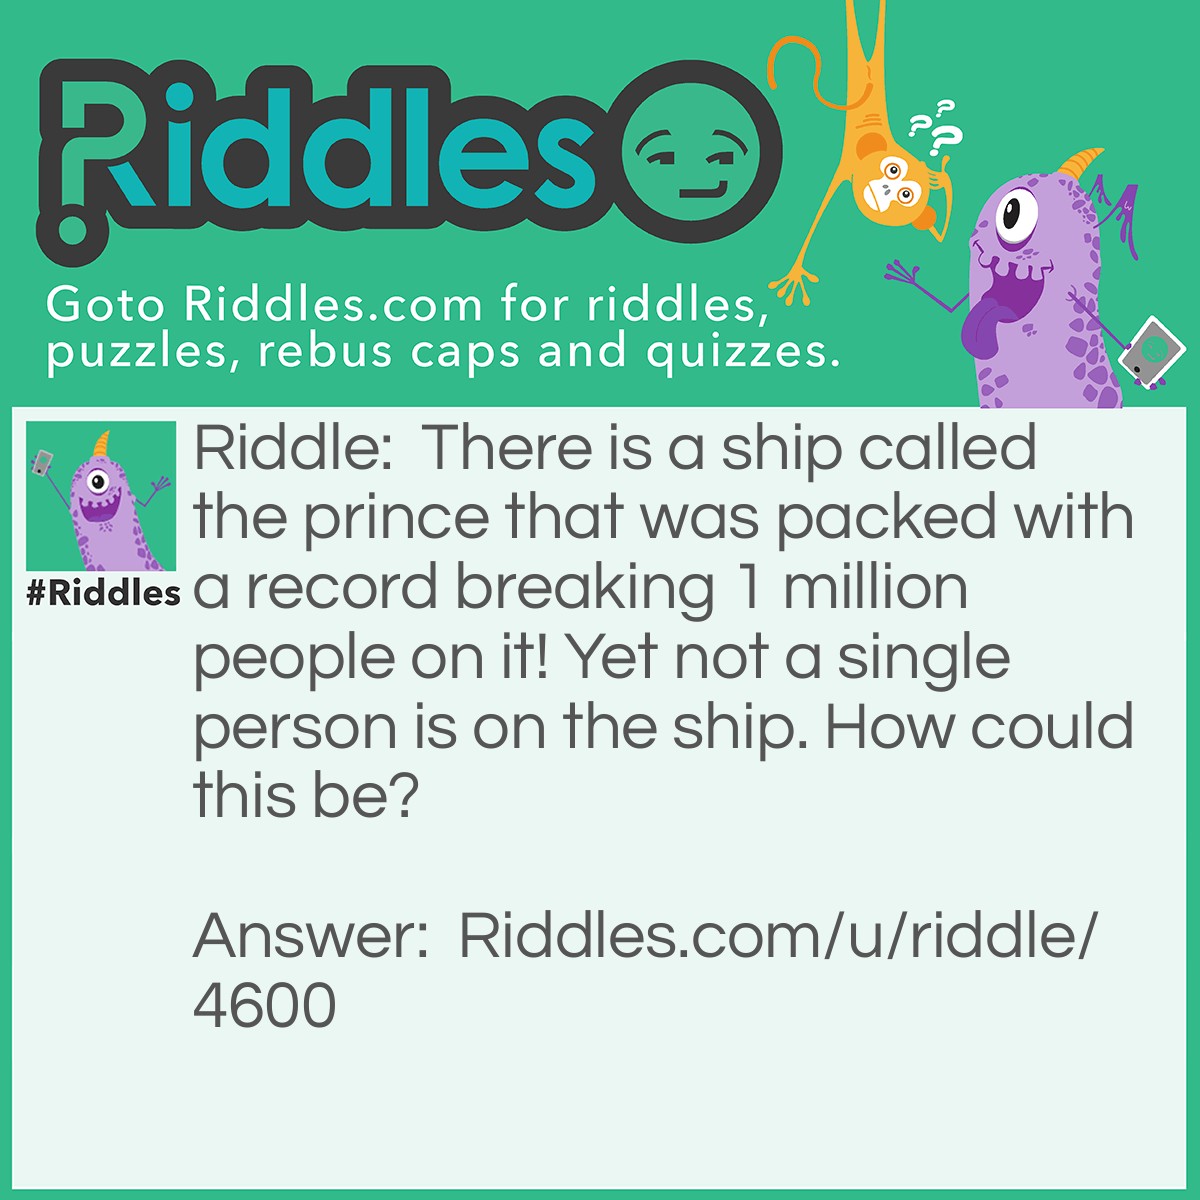 Riddle: There is a ship called the prince that was packed with a record breaking 1 million people on it! Yet not a single person is on the ship. How could this be? Answer: They were all married.